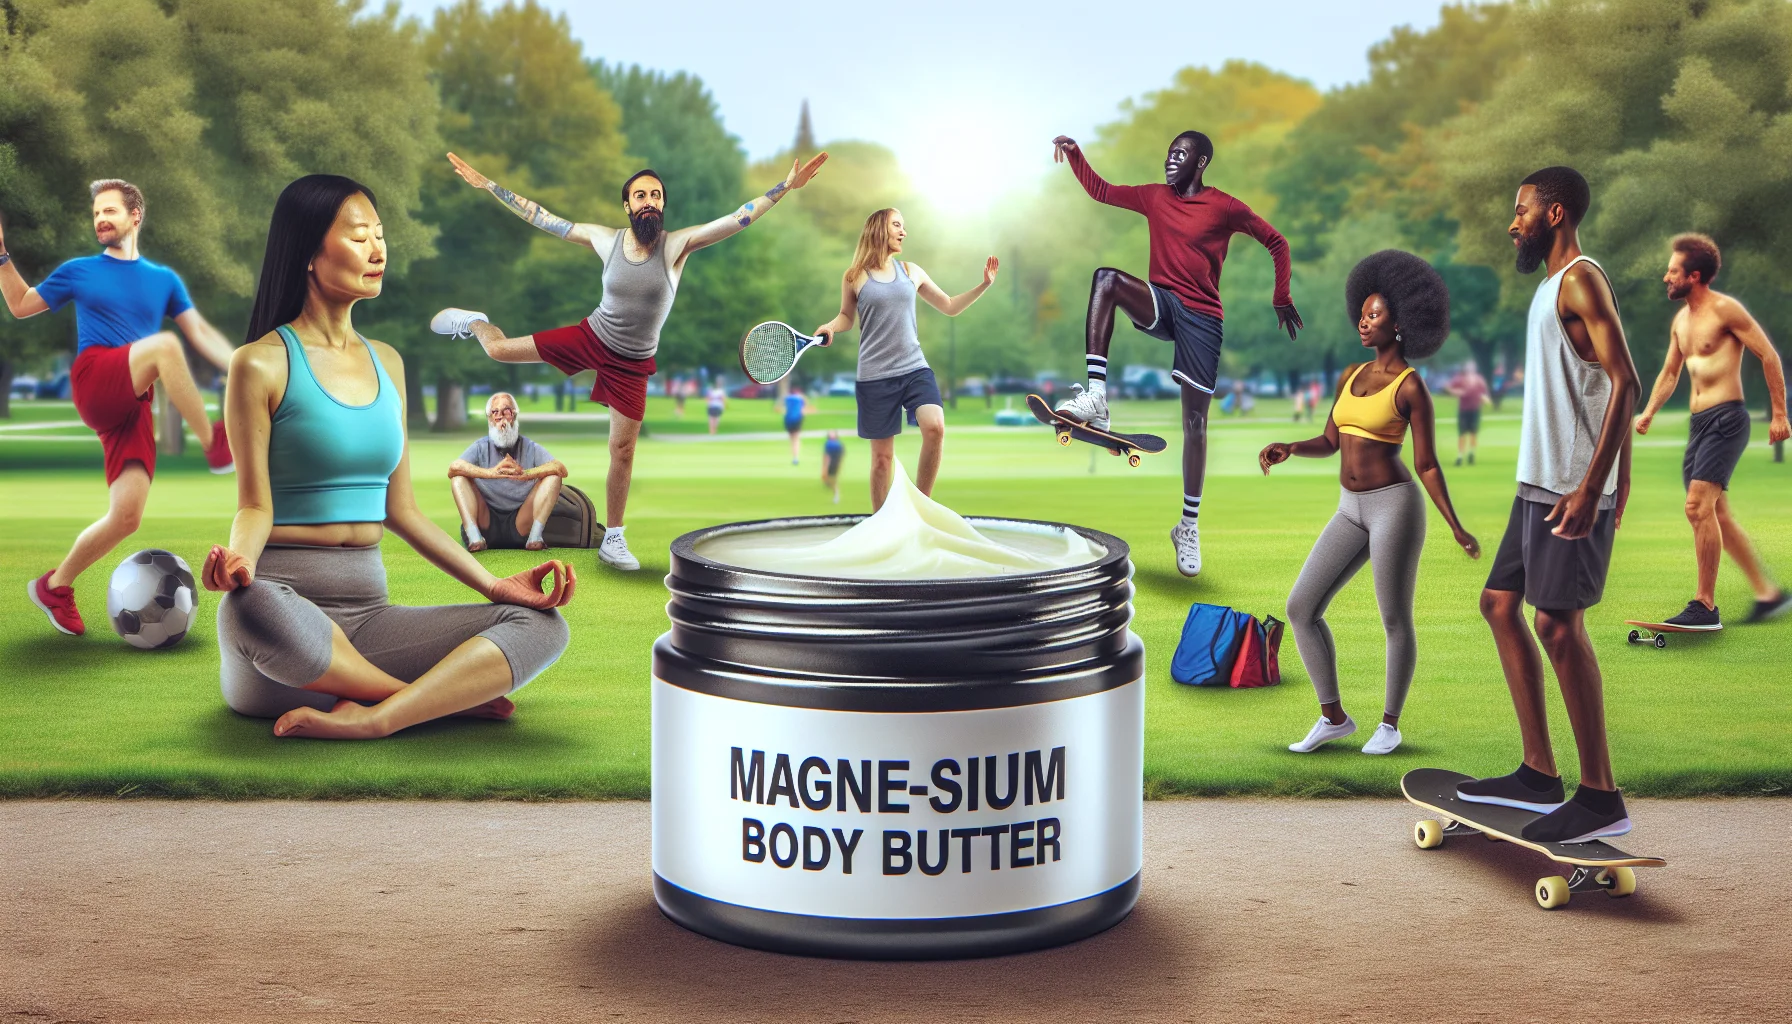 Create a humorous and realistic scene featuring a jar of magnesium body butter. It's widely known for its relaxing benefits to both the skin and muscles. In the background, a lively park scene unfolds where diverse individuals of various descent and genders engage in different sports - a South Asian woman doing yoga, a Caucasian man skateboarding, a Hispanic woman playing tennis, and a Black man jogging. The jar of magnesium body butter takes center stage, almost as if it's the secret behind their vitality and energy.